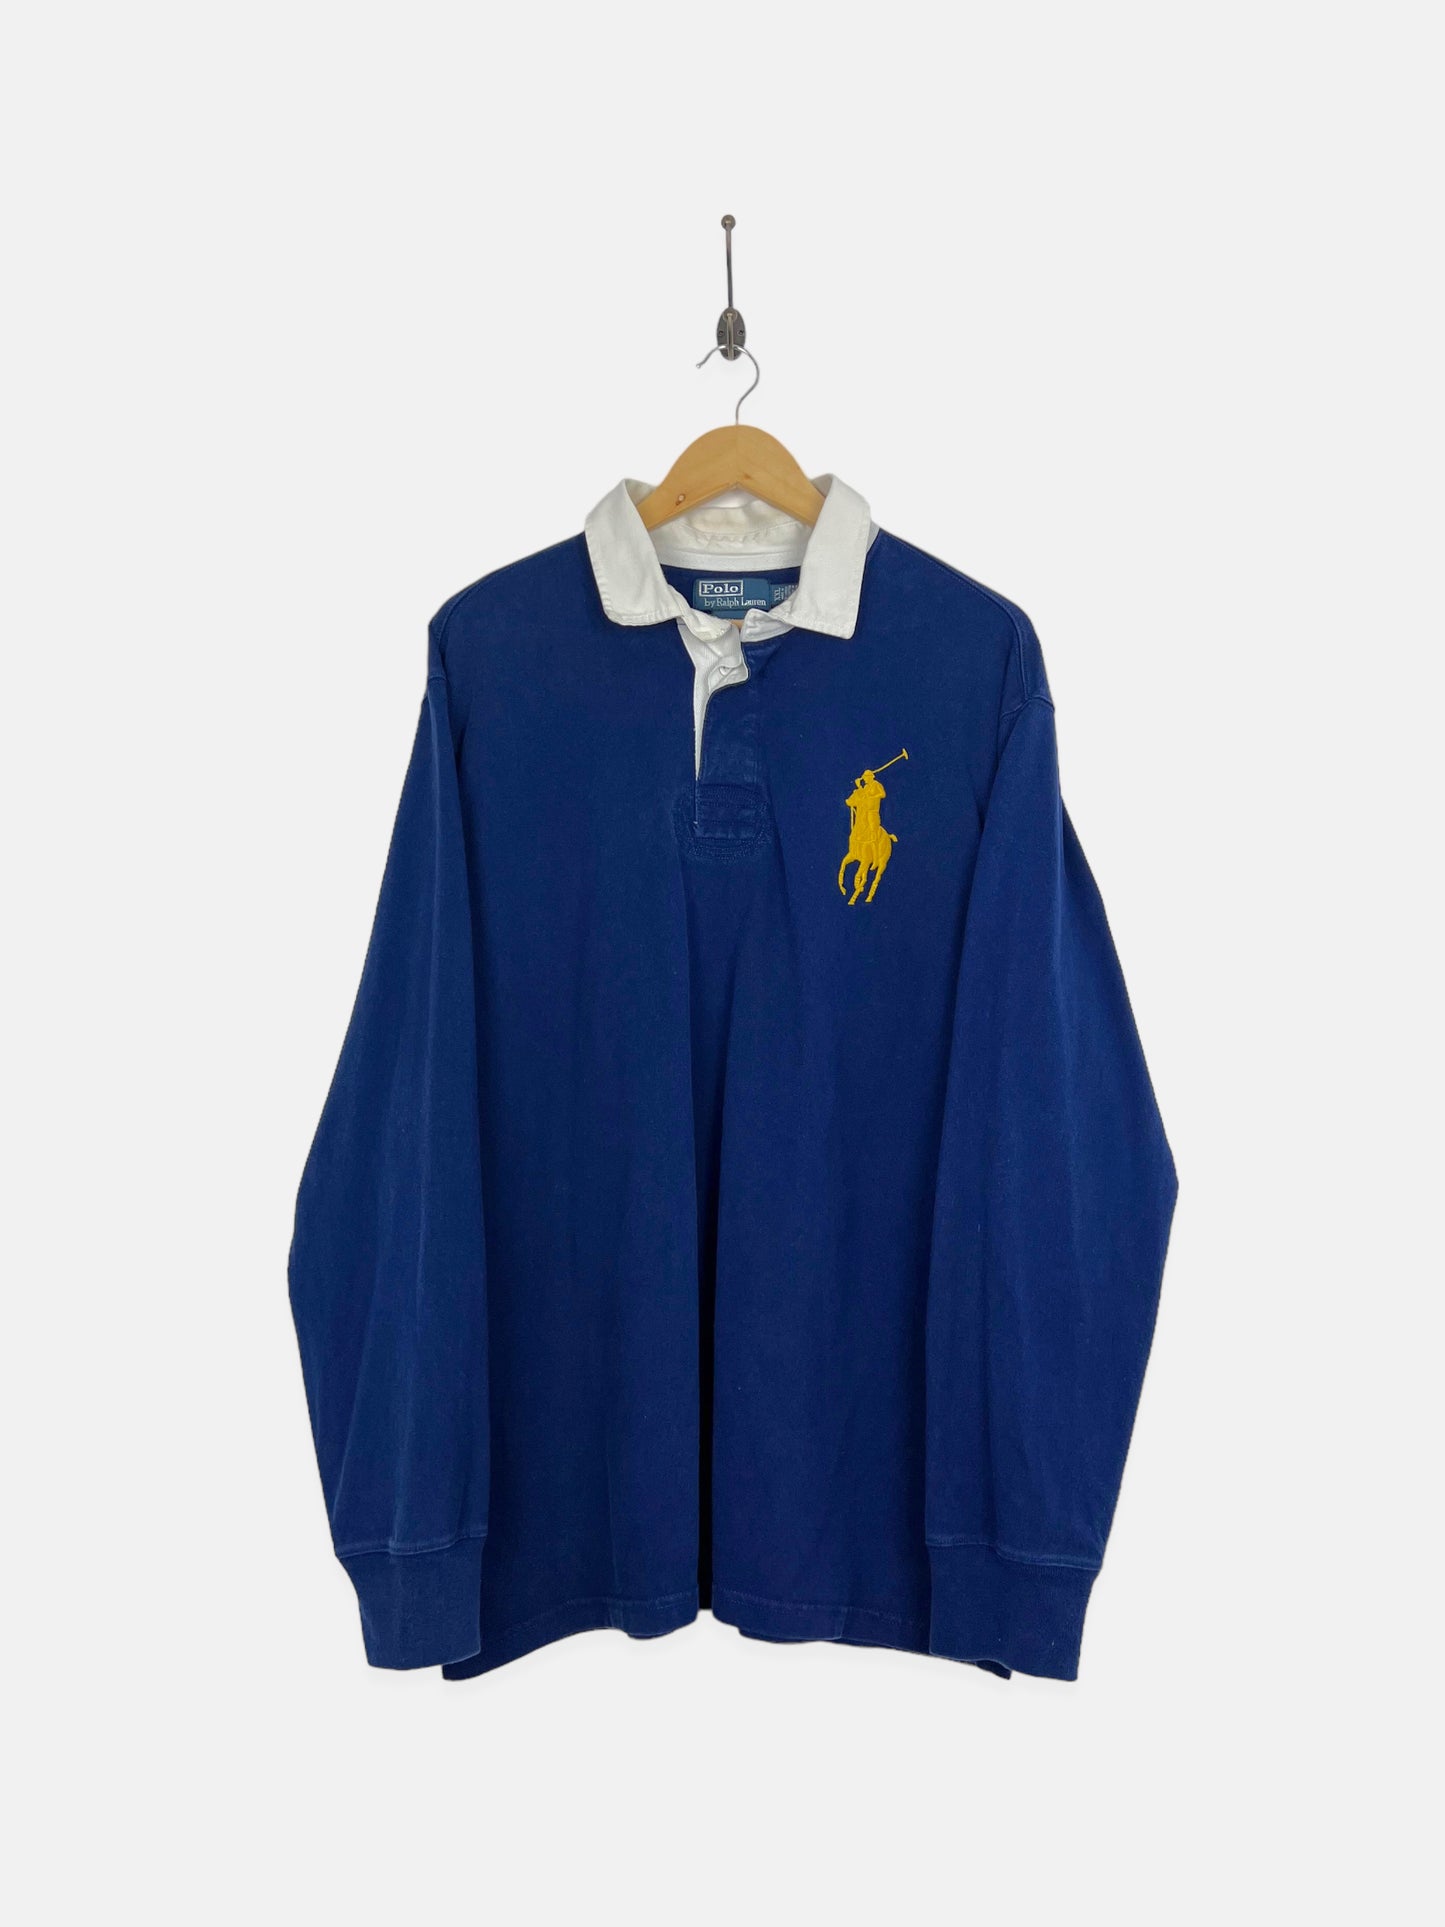 90's Ralph Lauren Embroidered Vintage Longsleeve Polo Size XL-2XL